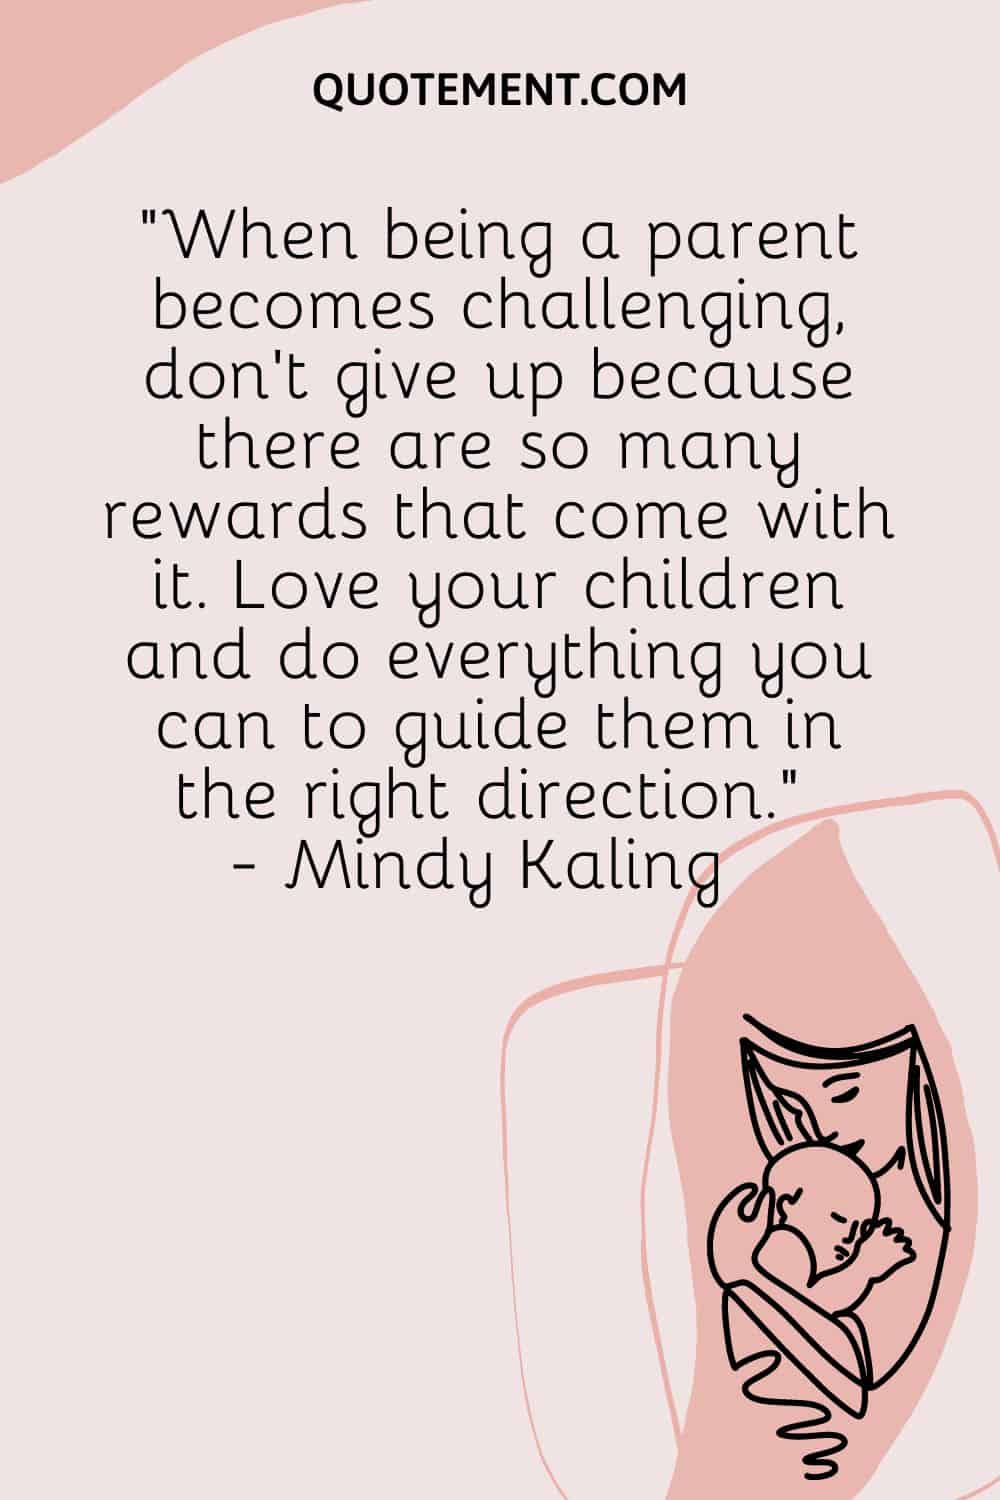 When being a parent becomes challenging, don’t give up because there are so many rewards that come with it.